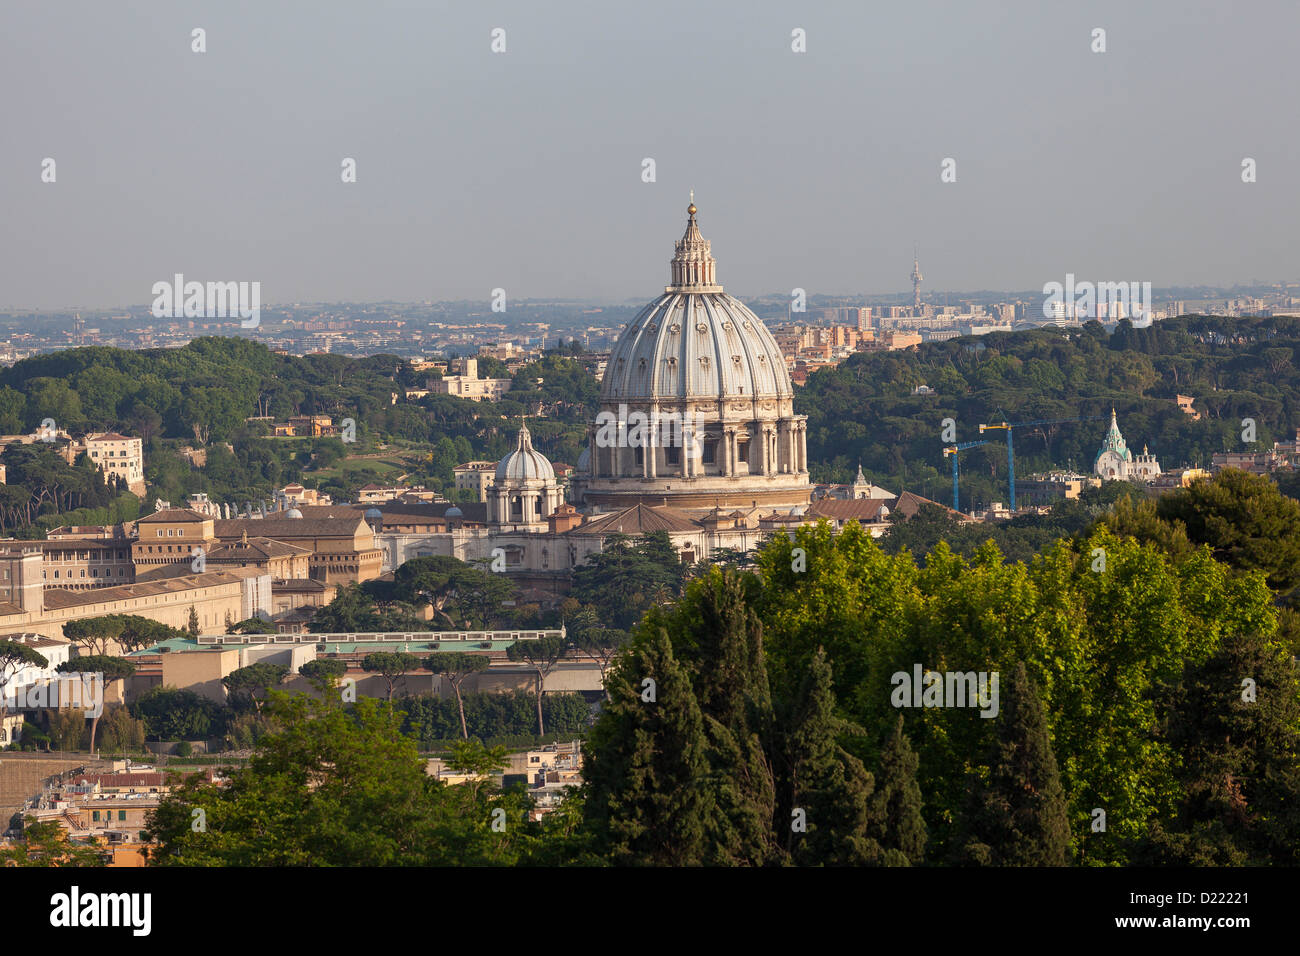 Saint Peter's cathedral dome in the distance Rome Italy Stock Photo